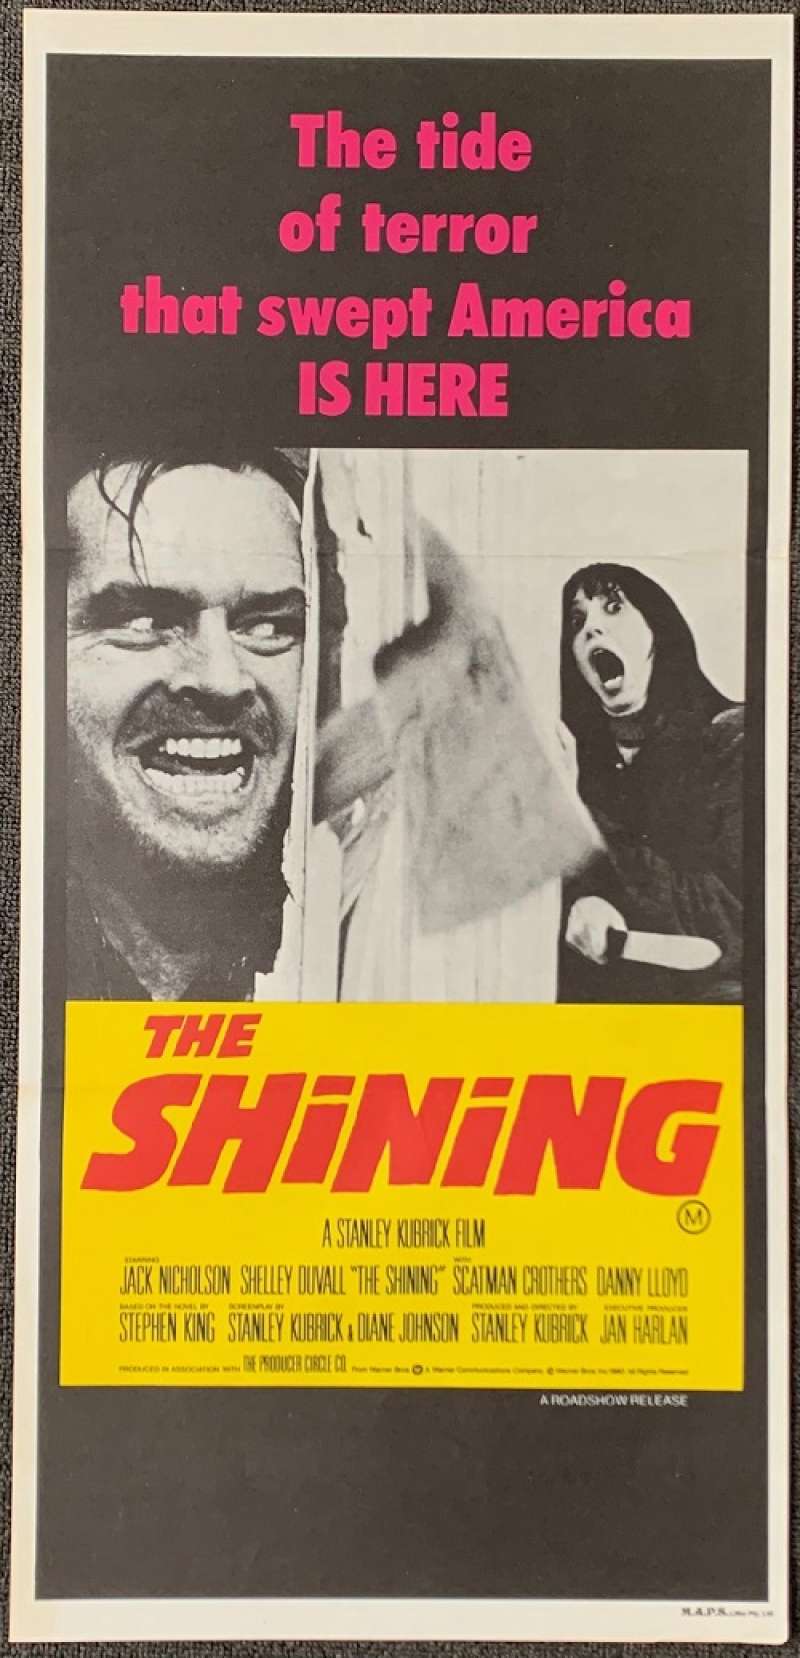 All About Movies - The Shining Original Daybill 1980 Nicholson Stanley Kubrick Horror